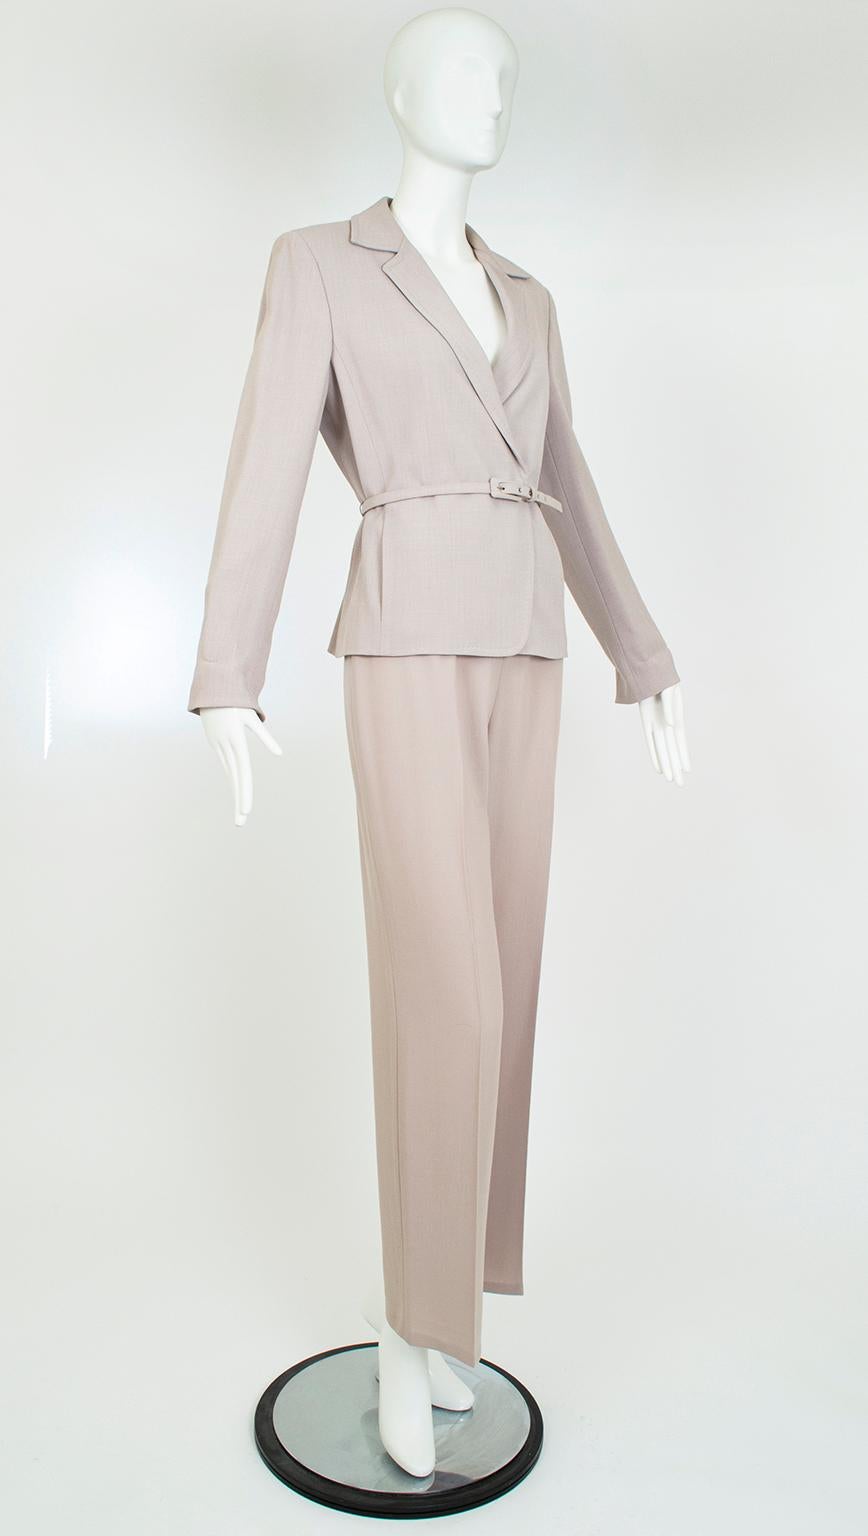 Brimming with understated European luxury, this tonal taupe suit strikes just the right balance between strength and femininity. The softly flowing trousers complement the gentle curves of the wrapping jacket, whose wide shoulders are gracefully